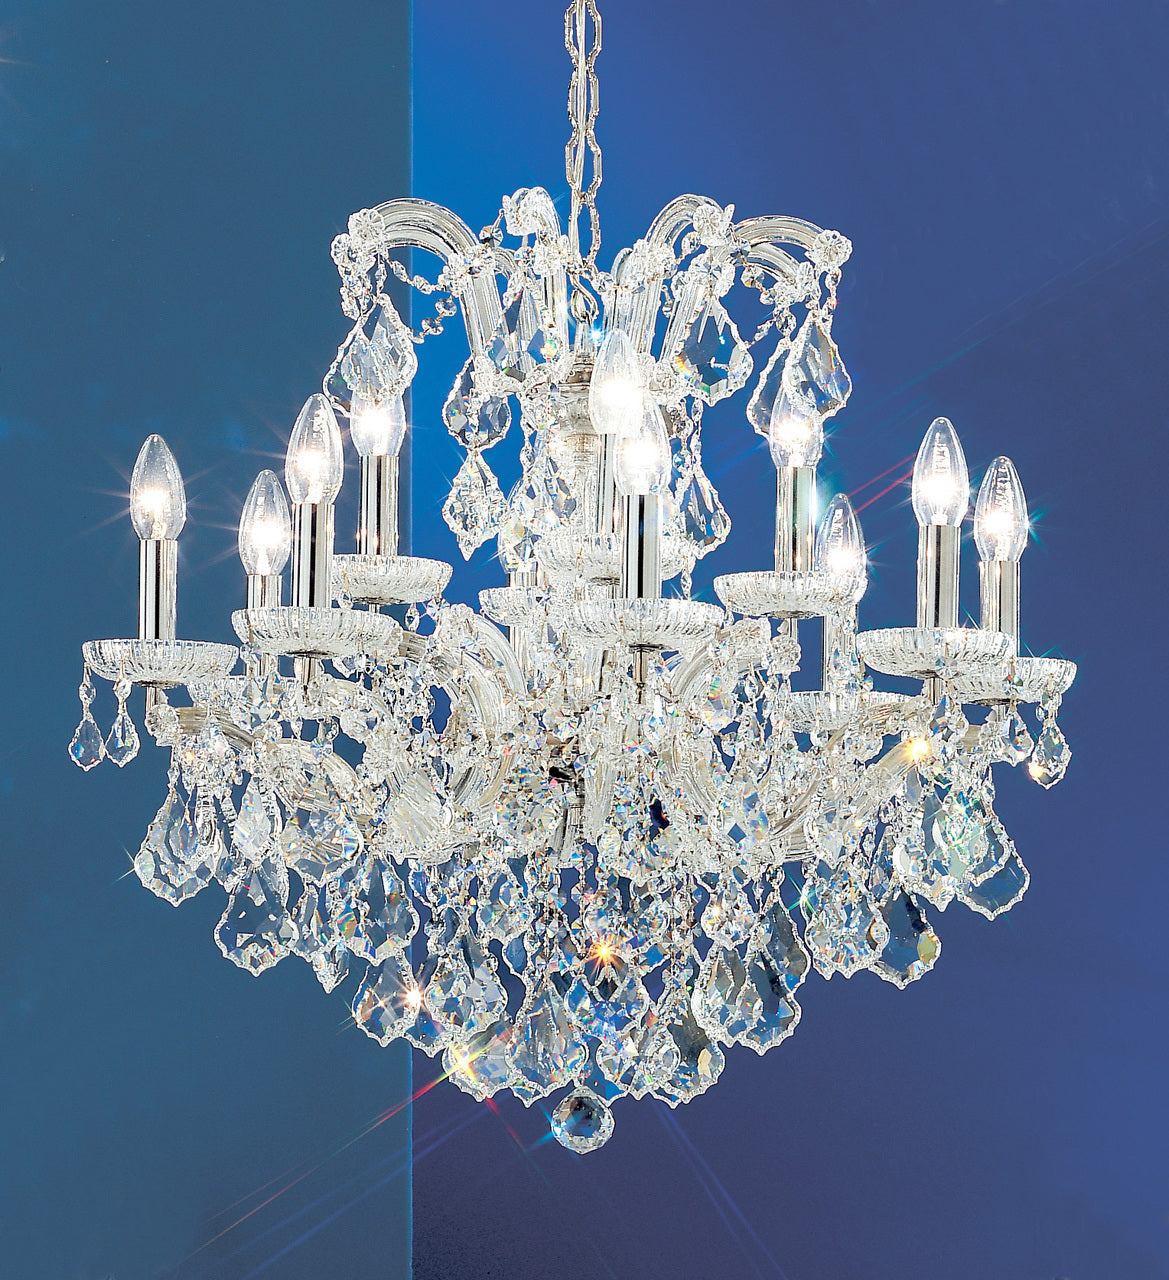 Classic Lighting 8132 OWG SC Maria Theresa Traditional Crystal Chandelier in Olde World Gold (Imported from Italy)